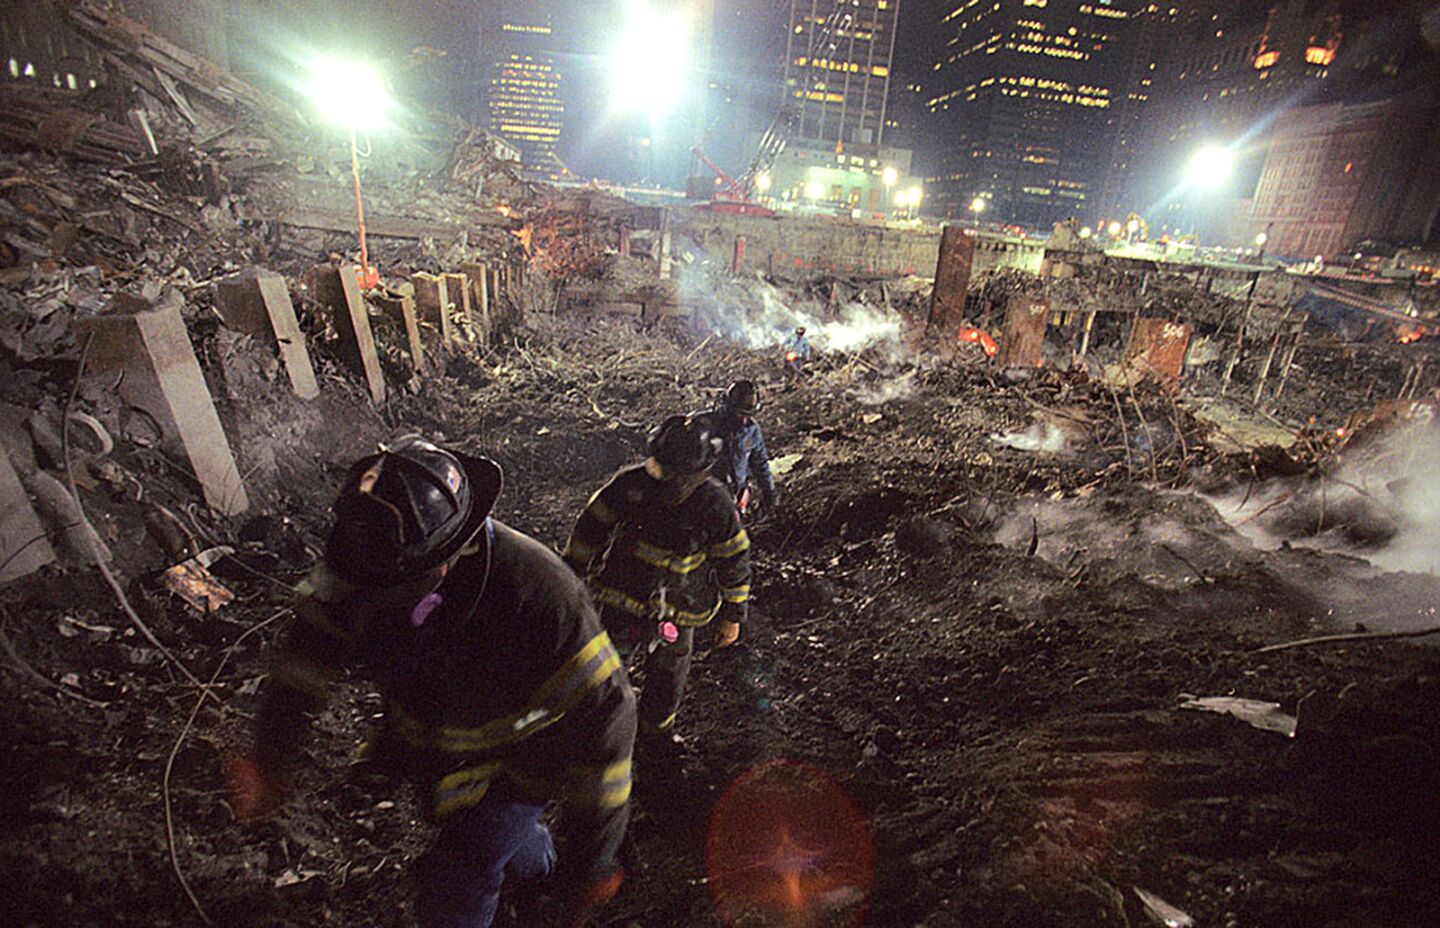 A search team scours the World Trade Center site after the 9/11 terror attacks.